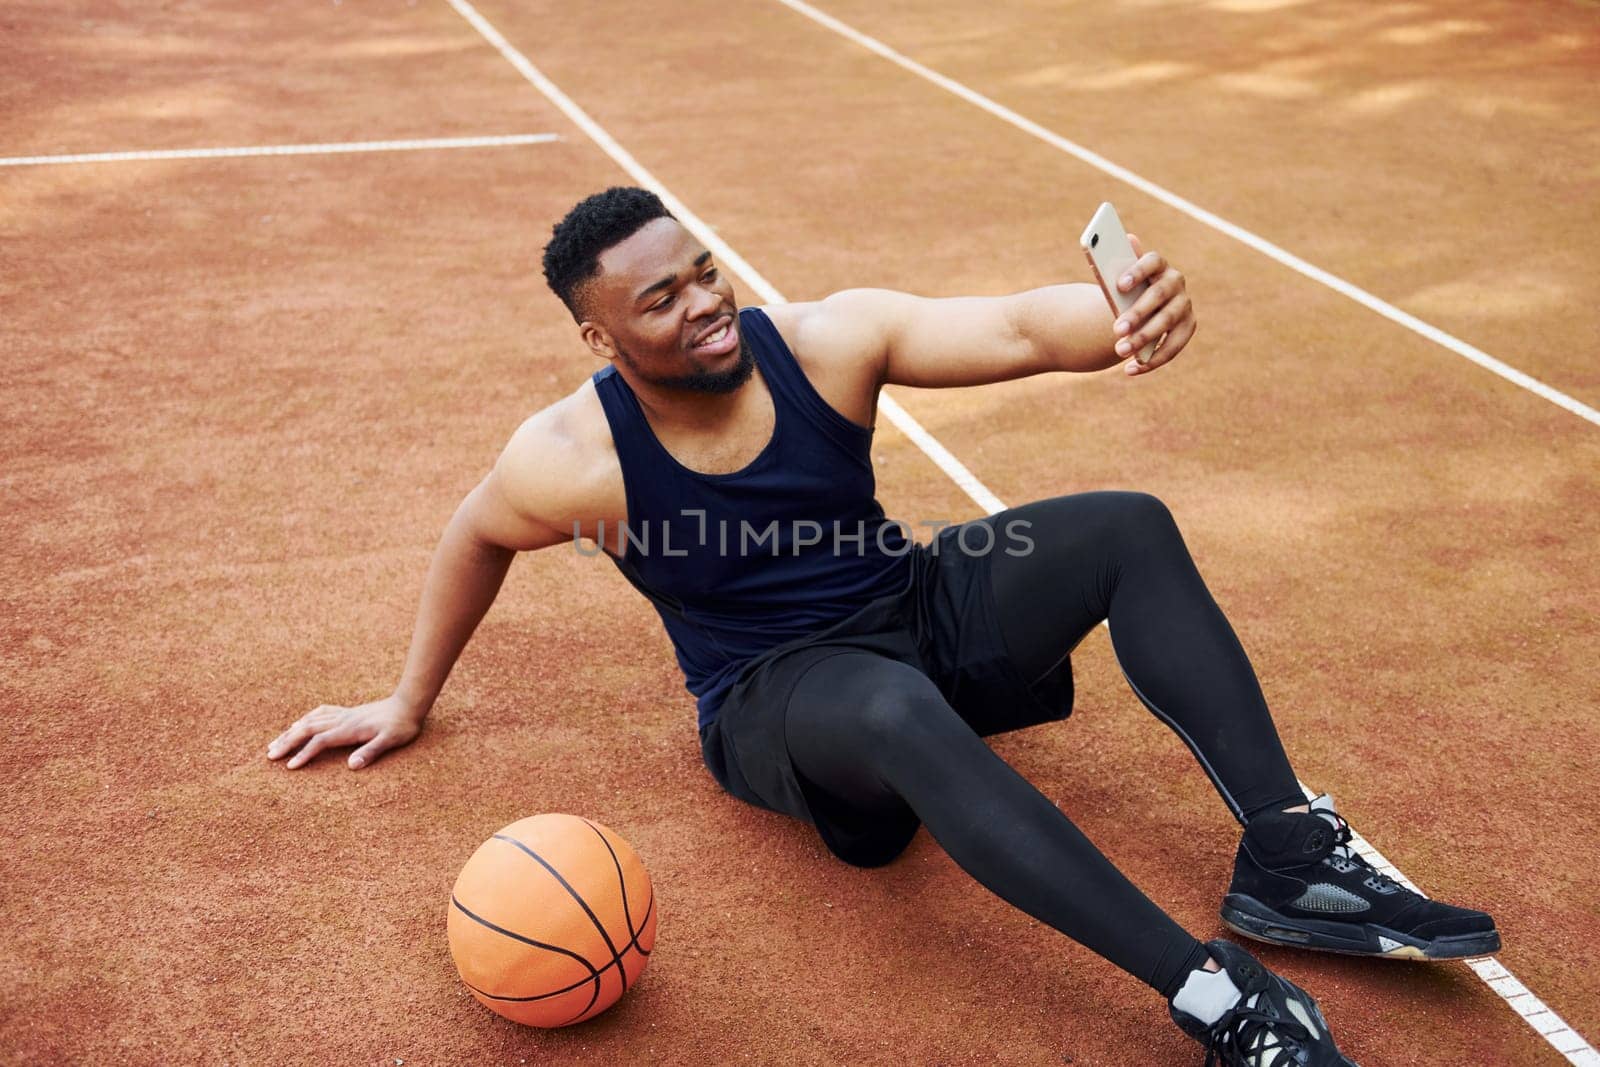 Making selfie. African american man plays basketball on the court outdoors by Standret